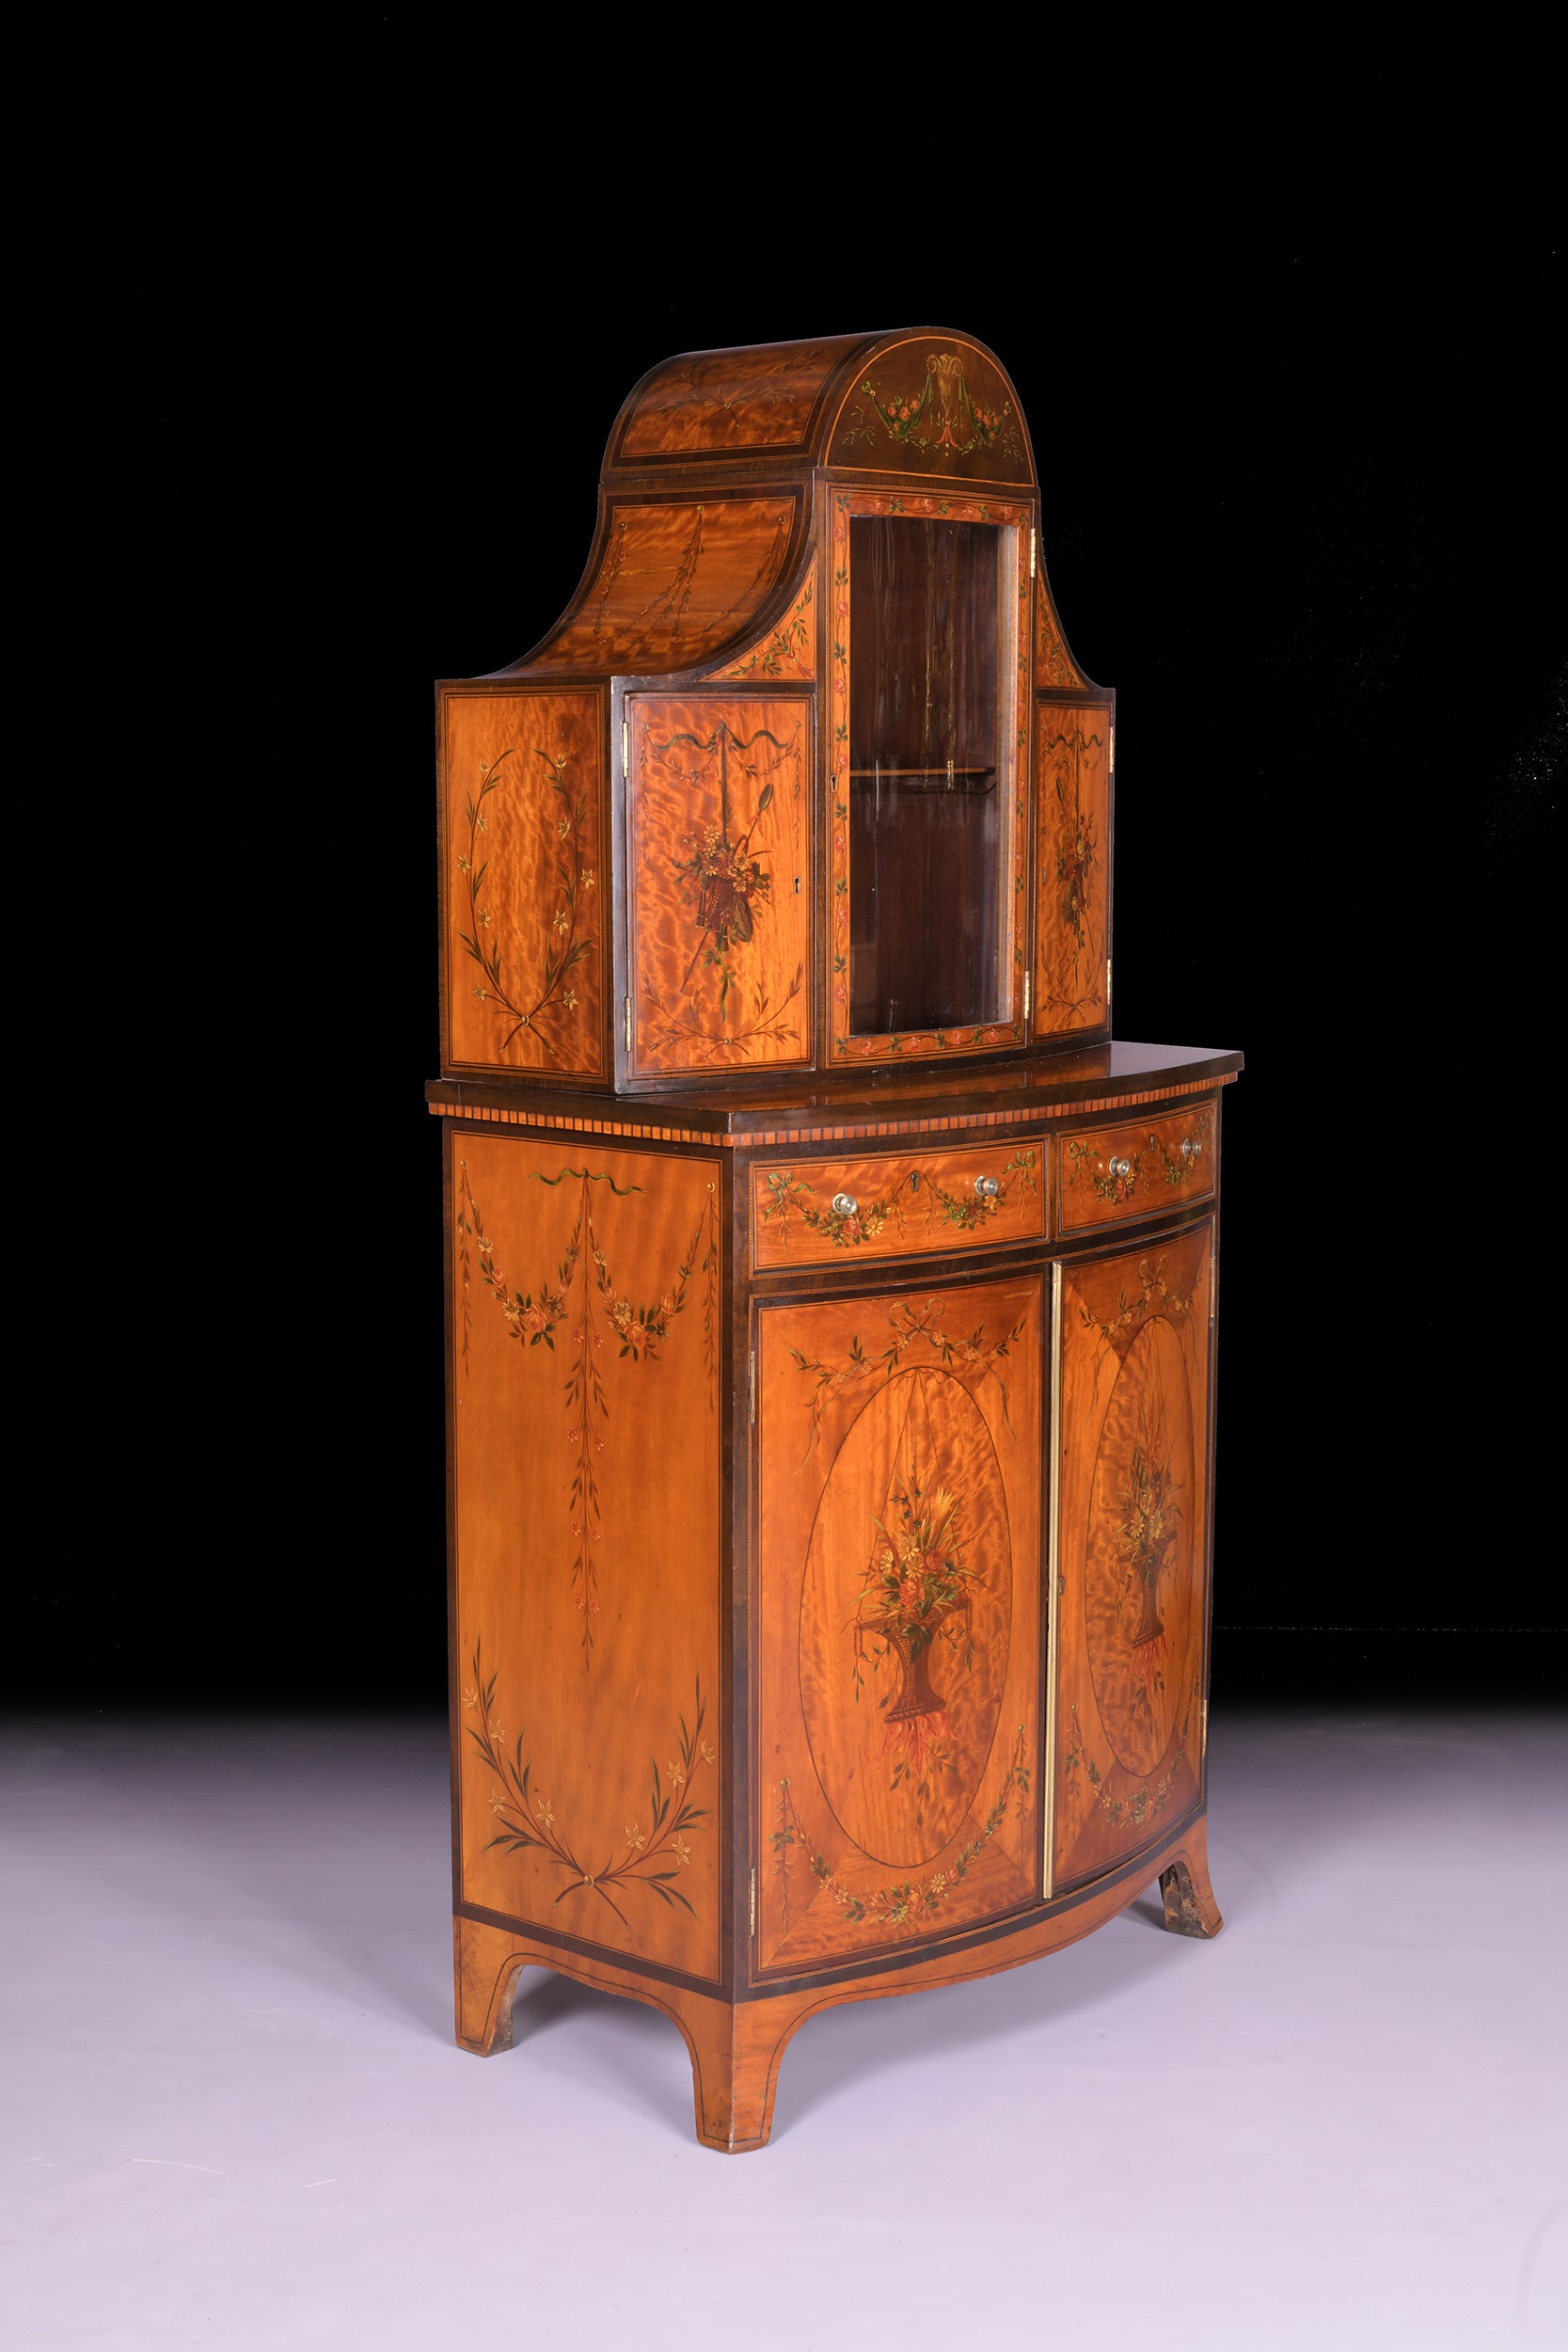 18TH CENTURY SATINWOOD SIDE CABINET - REF No. 4062